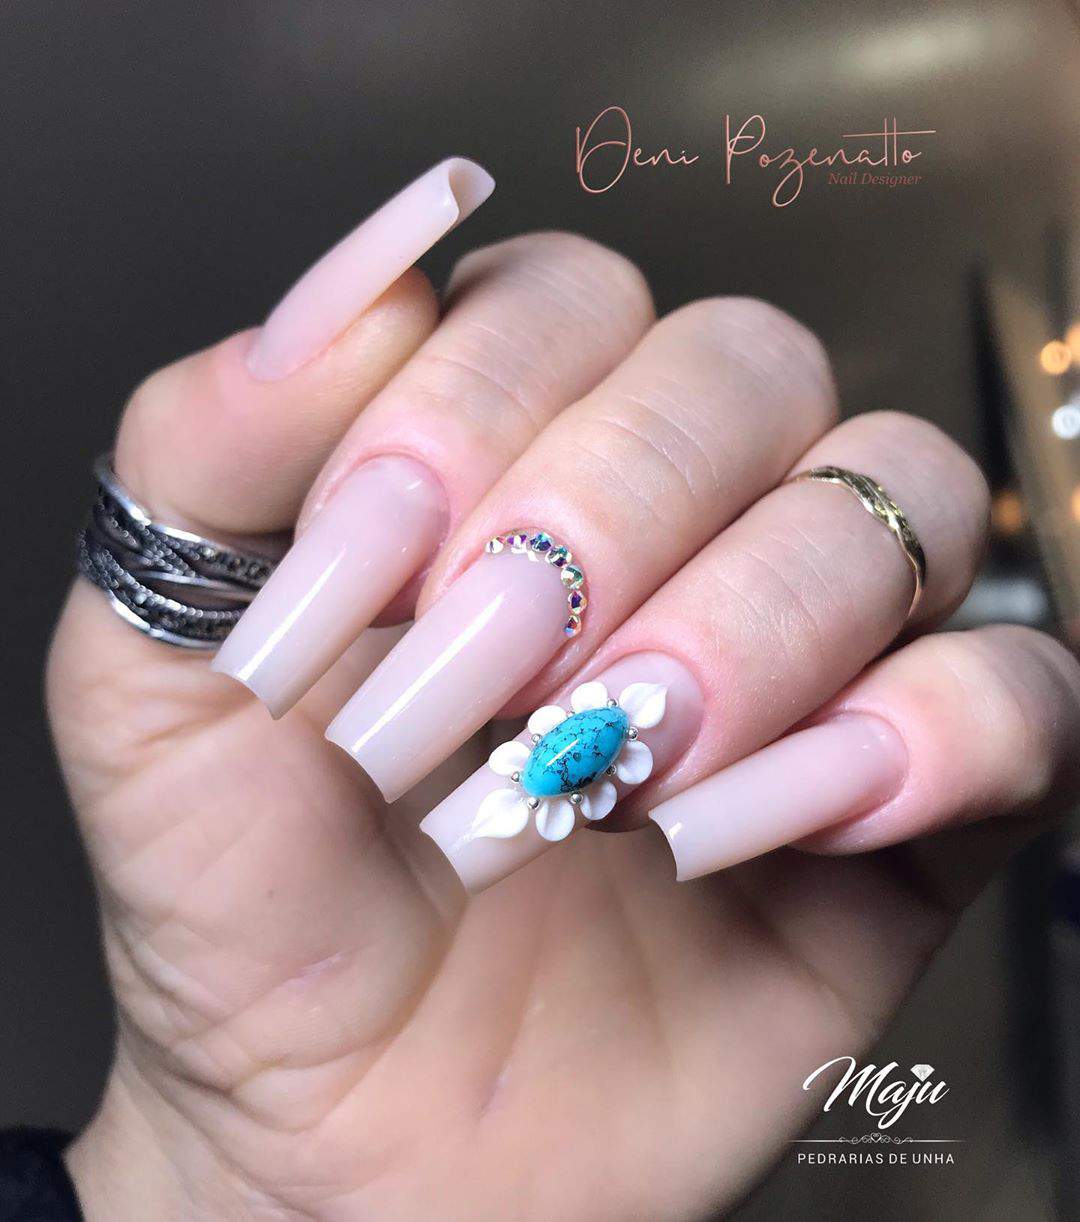 50 Best Nail Designs Trends To Try Out In 2022 images 13